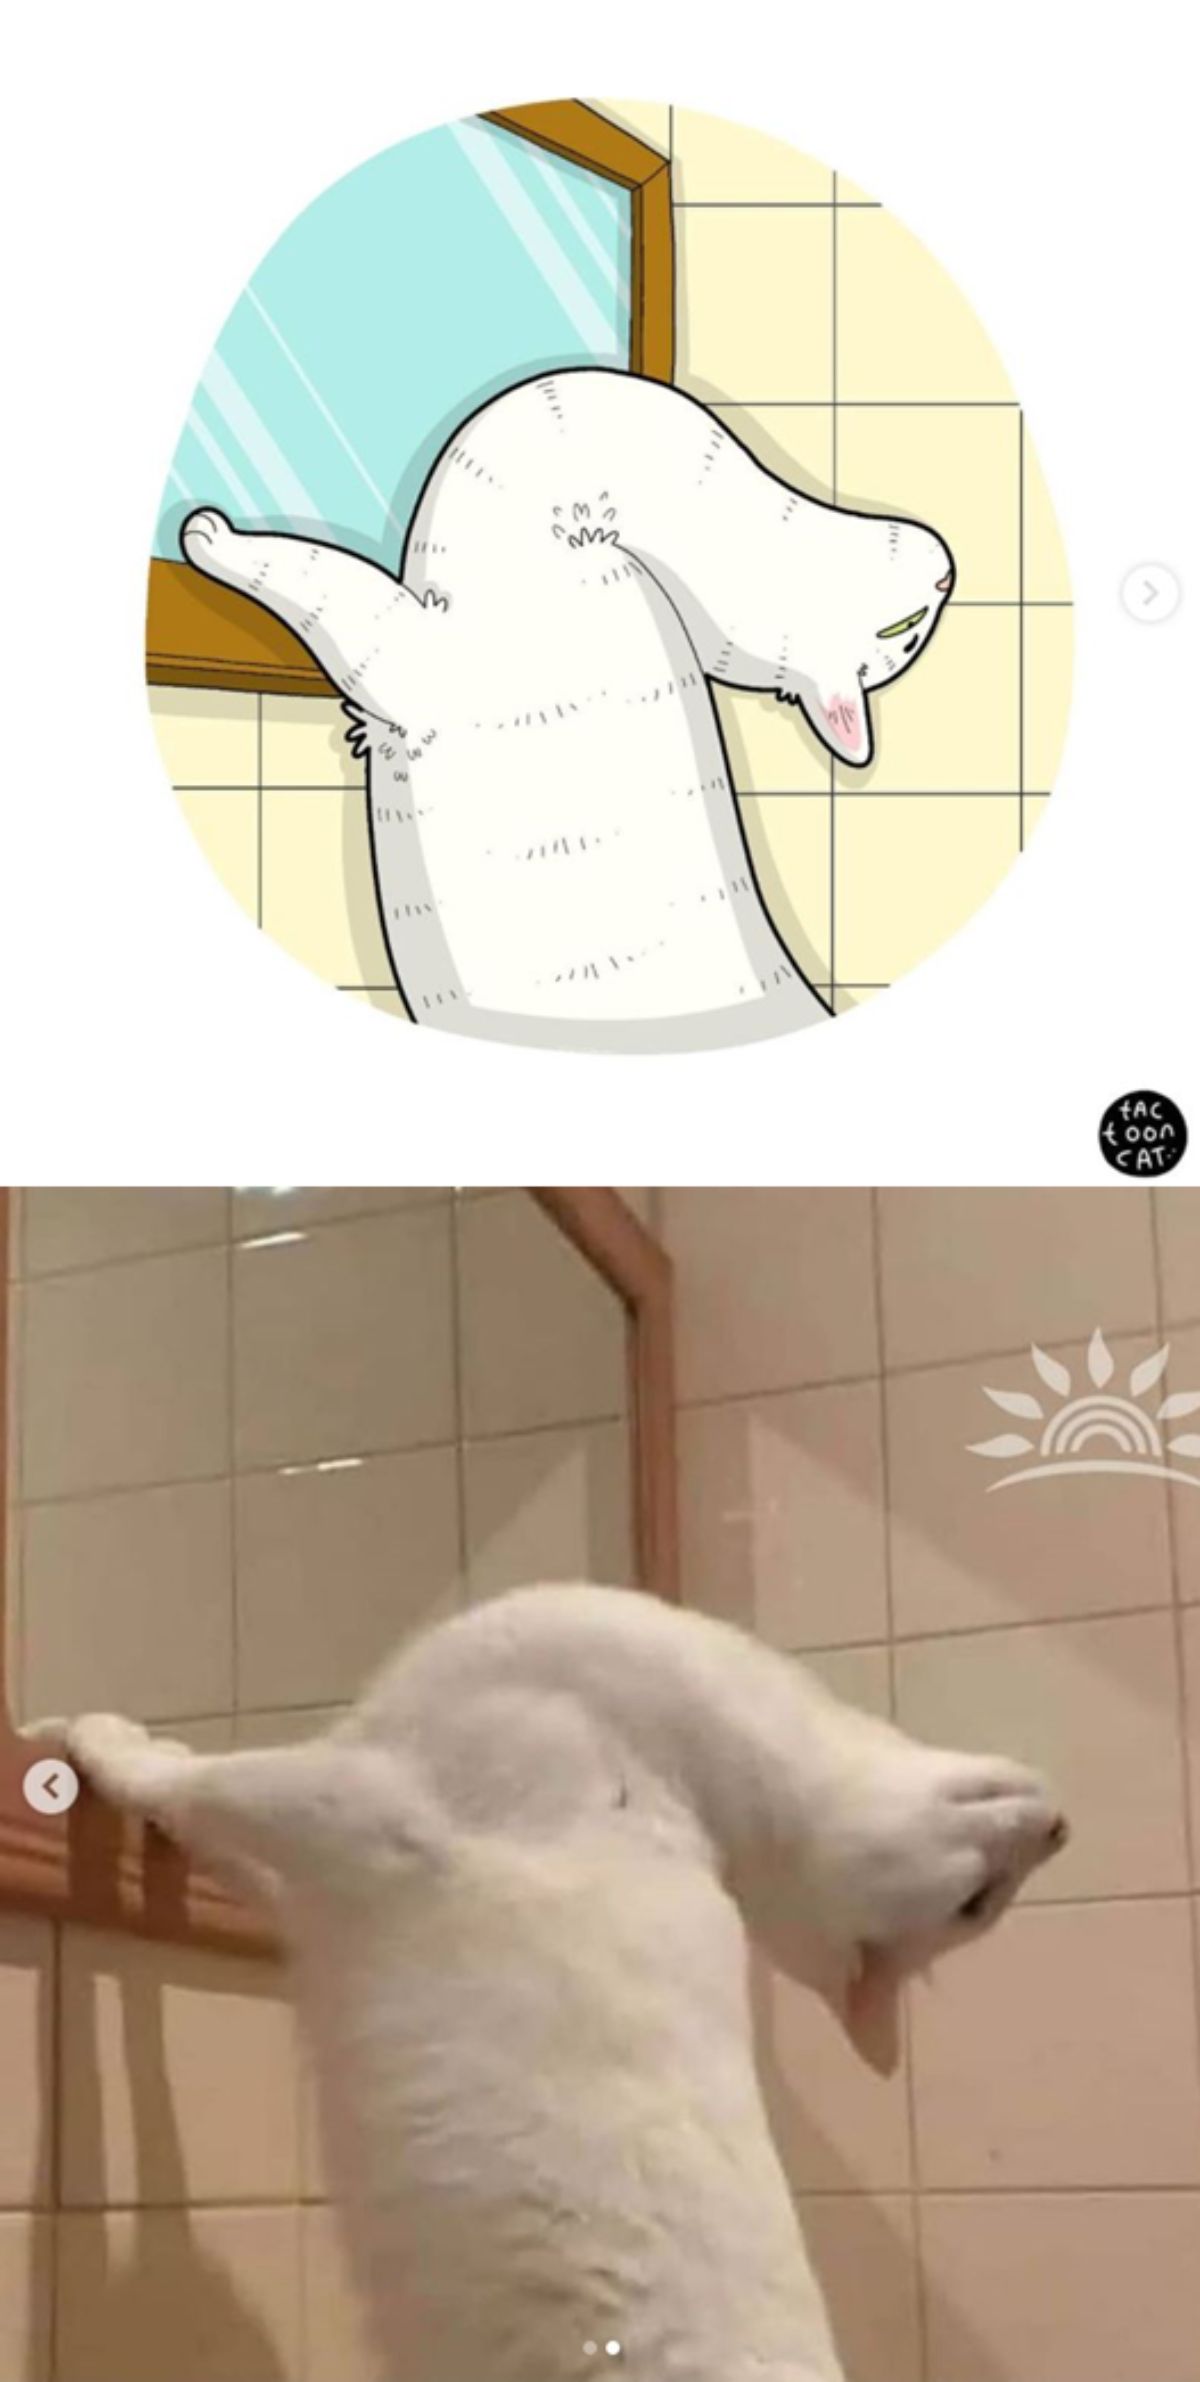 cartoon photo and real photo of a white cat standing in front of a mirror with the front legs resting on the mirror frame and the head turned back